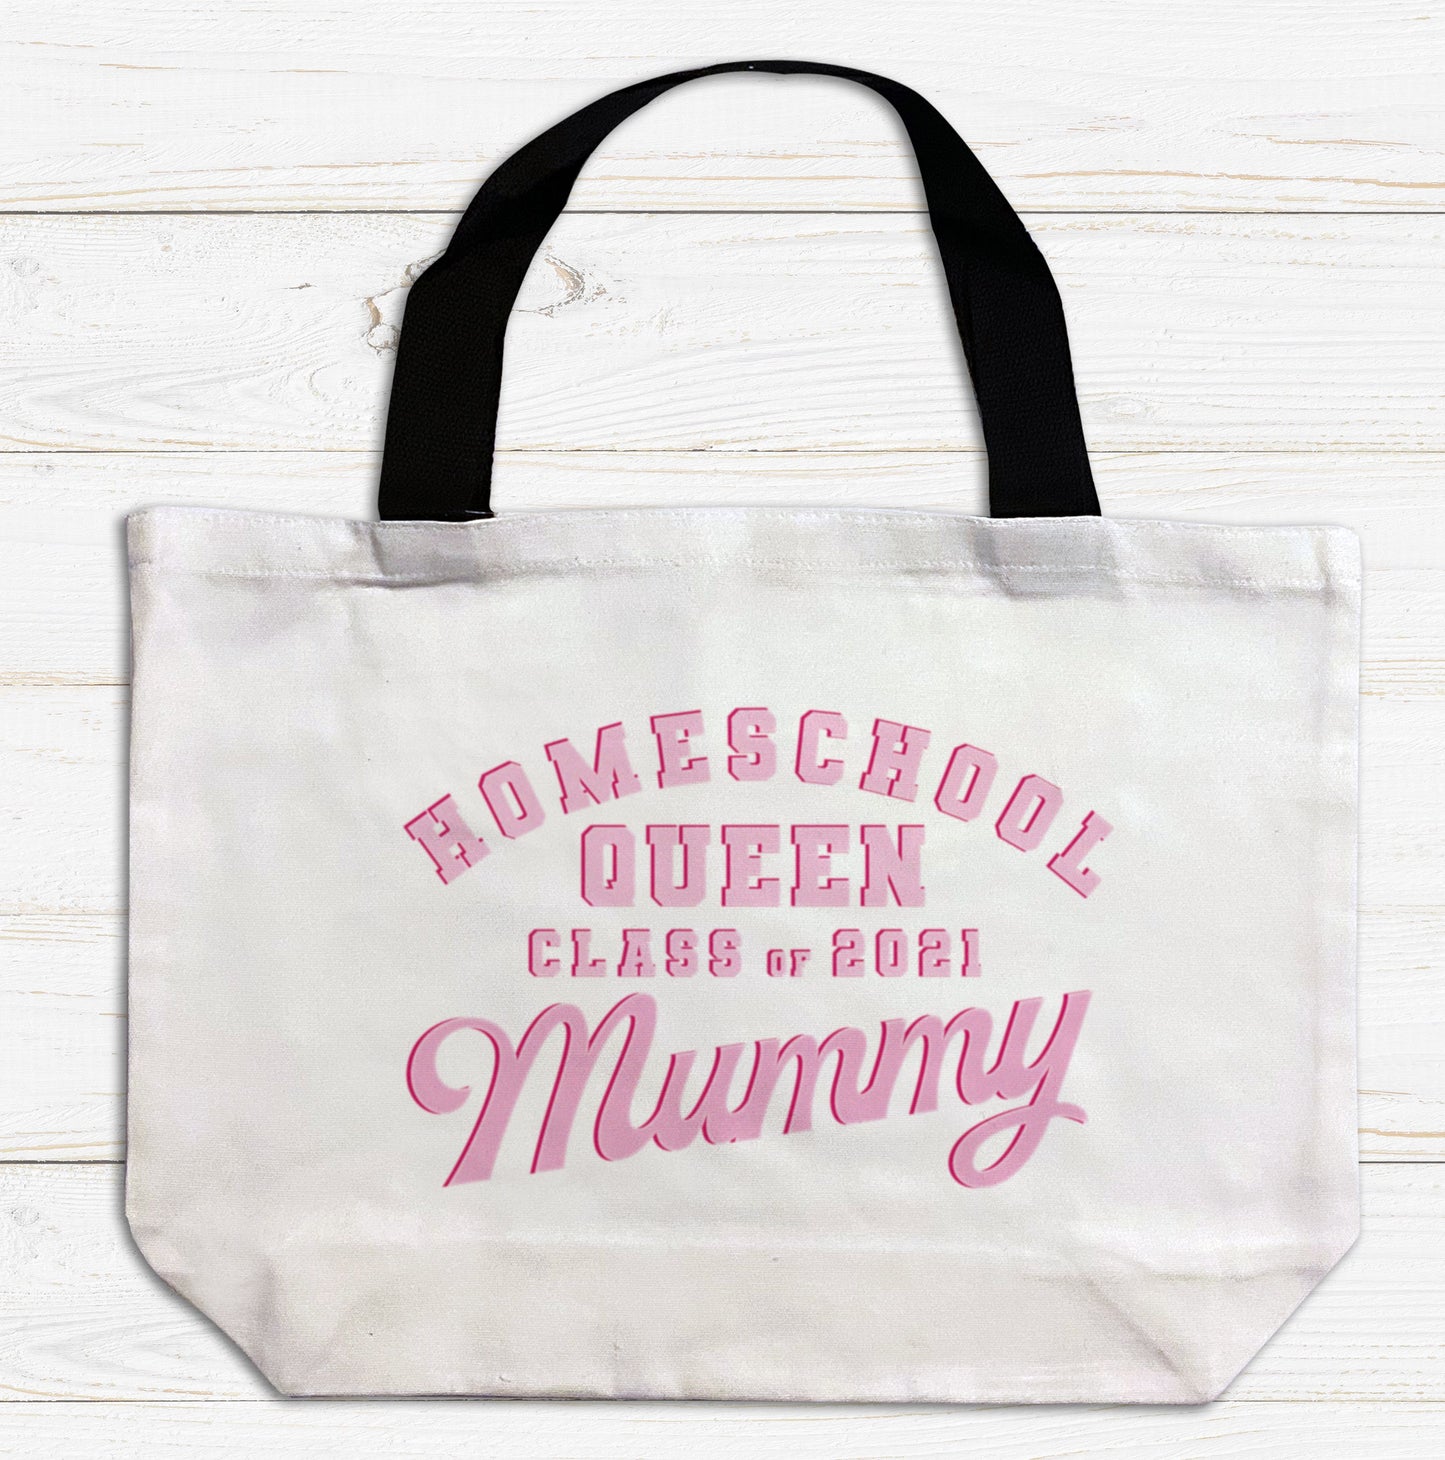 Homeschool Queen Large Tote Bag. Large Shopping bag. Birthday Gift. Mother's Day Gift Unique Gift Idea. Cute Tote Bag. Gifts for her.